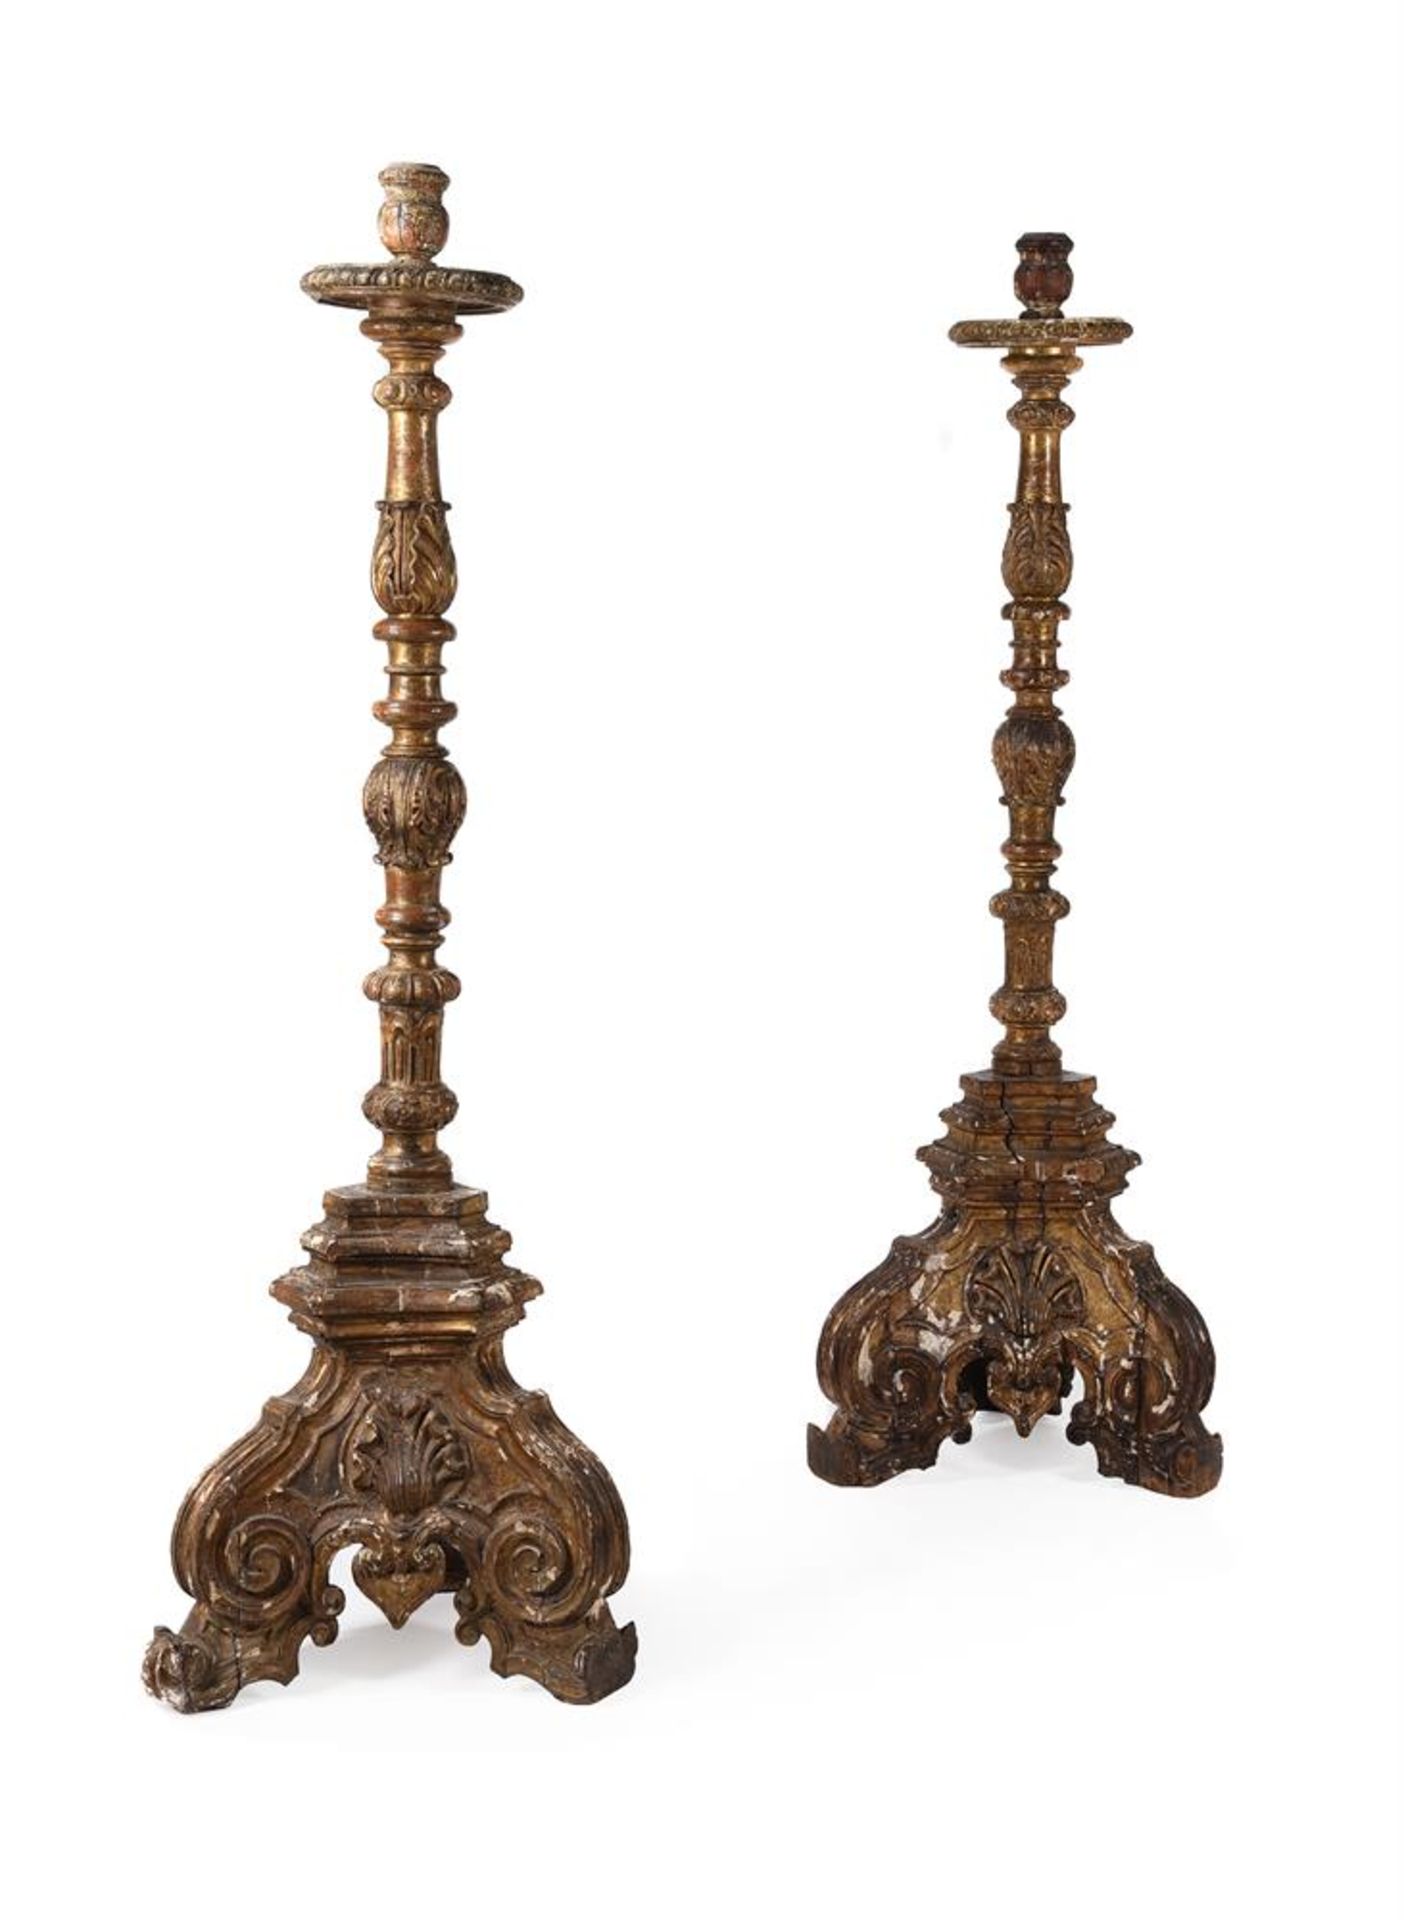 A PAIR OF GILTWOOD TORCHERES, FIRST HALF 19TH CENTURY